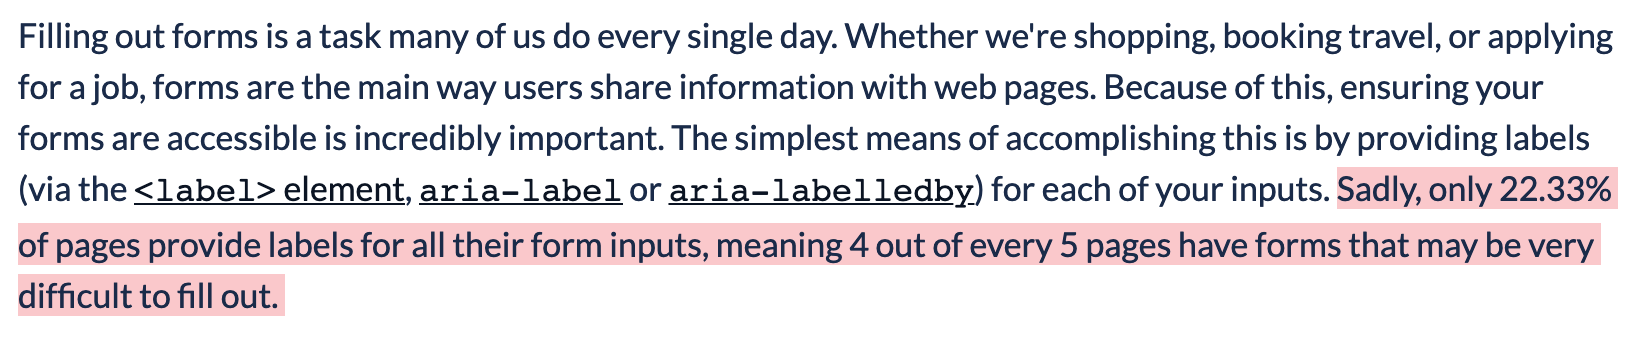 Paragraph of the article with highlighted text: Sadly, only 22.33% of pages provide labels for all their form inputs, meaning 4 out of every 5 pages have forms that may be very difficult to fill out.